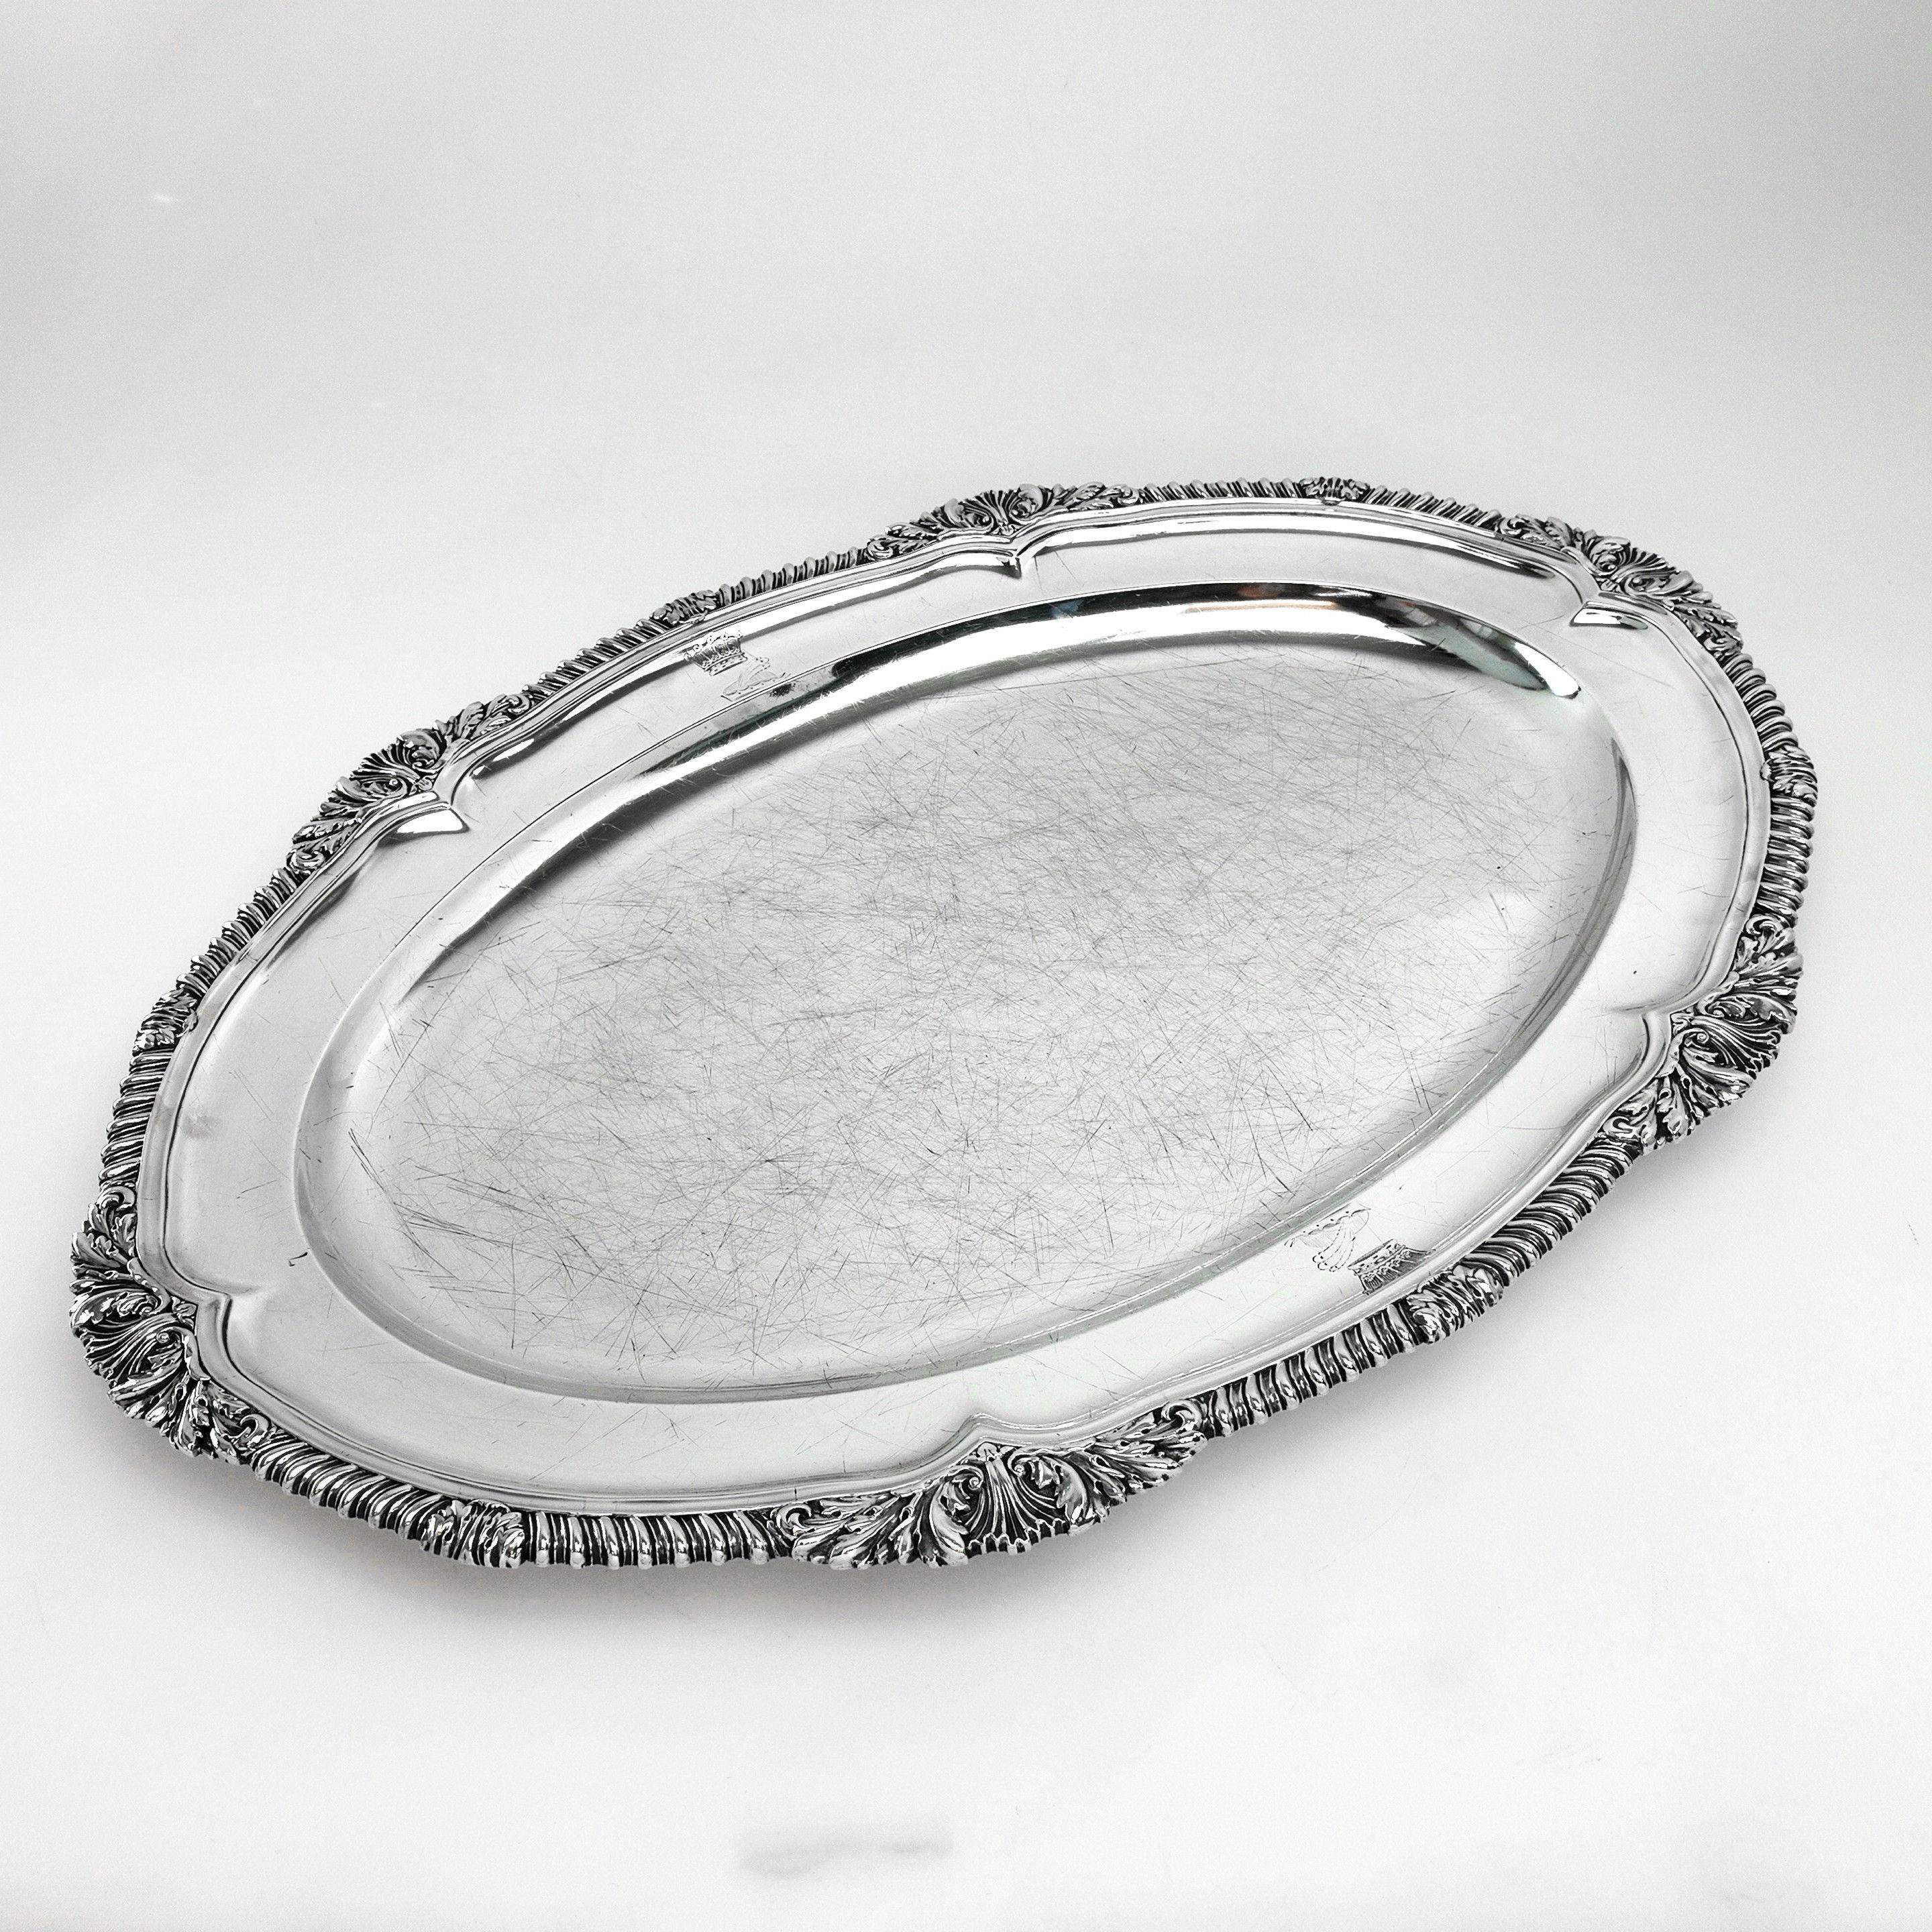 A Classic Georgian sterling silver Meat Dish serving platter. This Meat Platter is of substantial size and has a Classic oval shape. The Meat Platter has an ornate shell and gadroon border embellishing the rim. The Dish has two matched crests